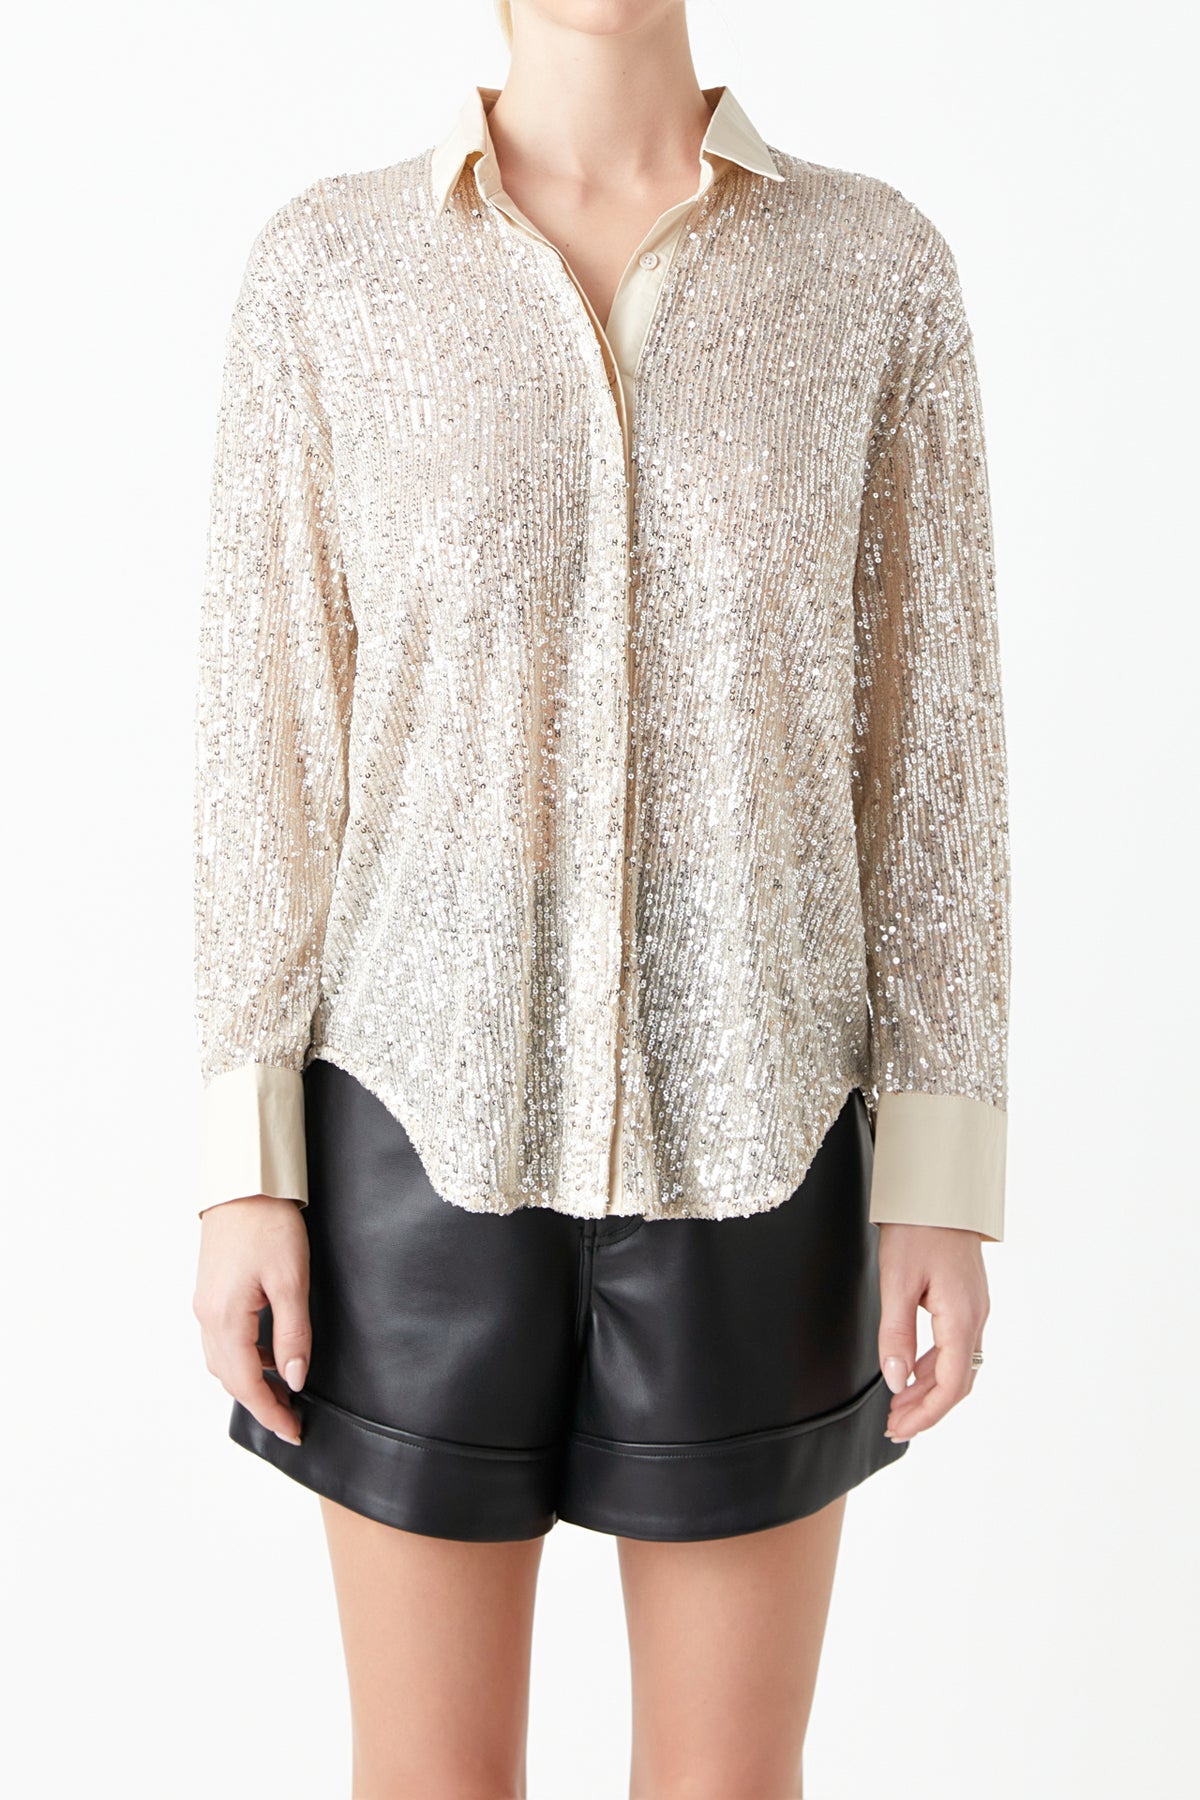 GREY LAB - Oversized Sequin Shirt - TOPS available at Objectrare